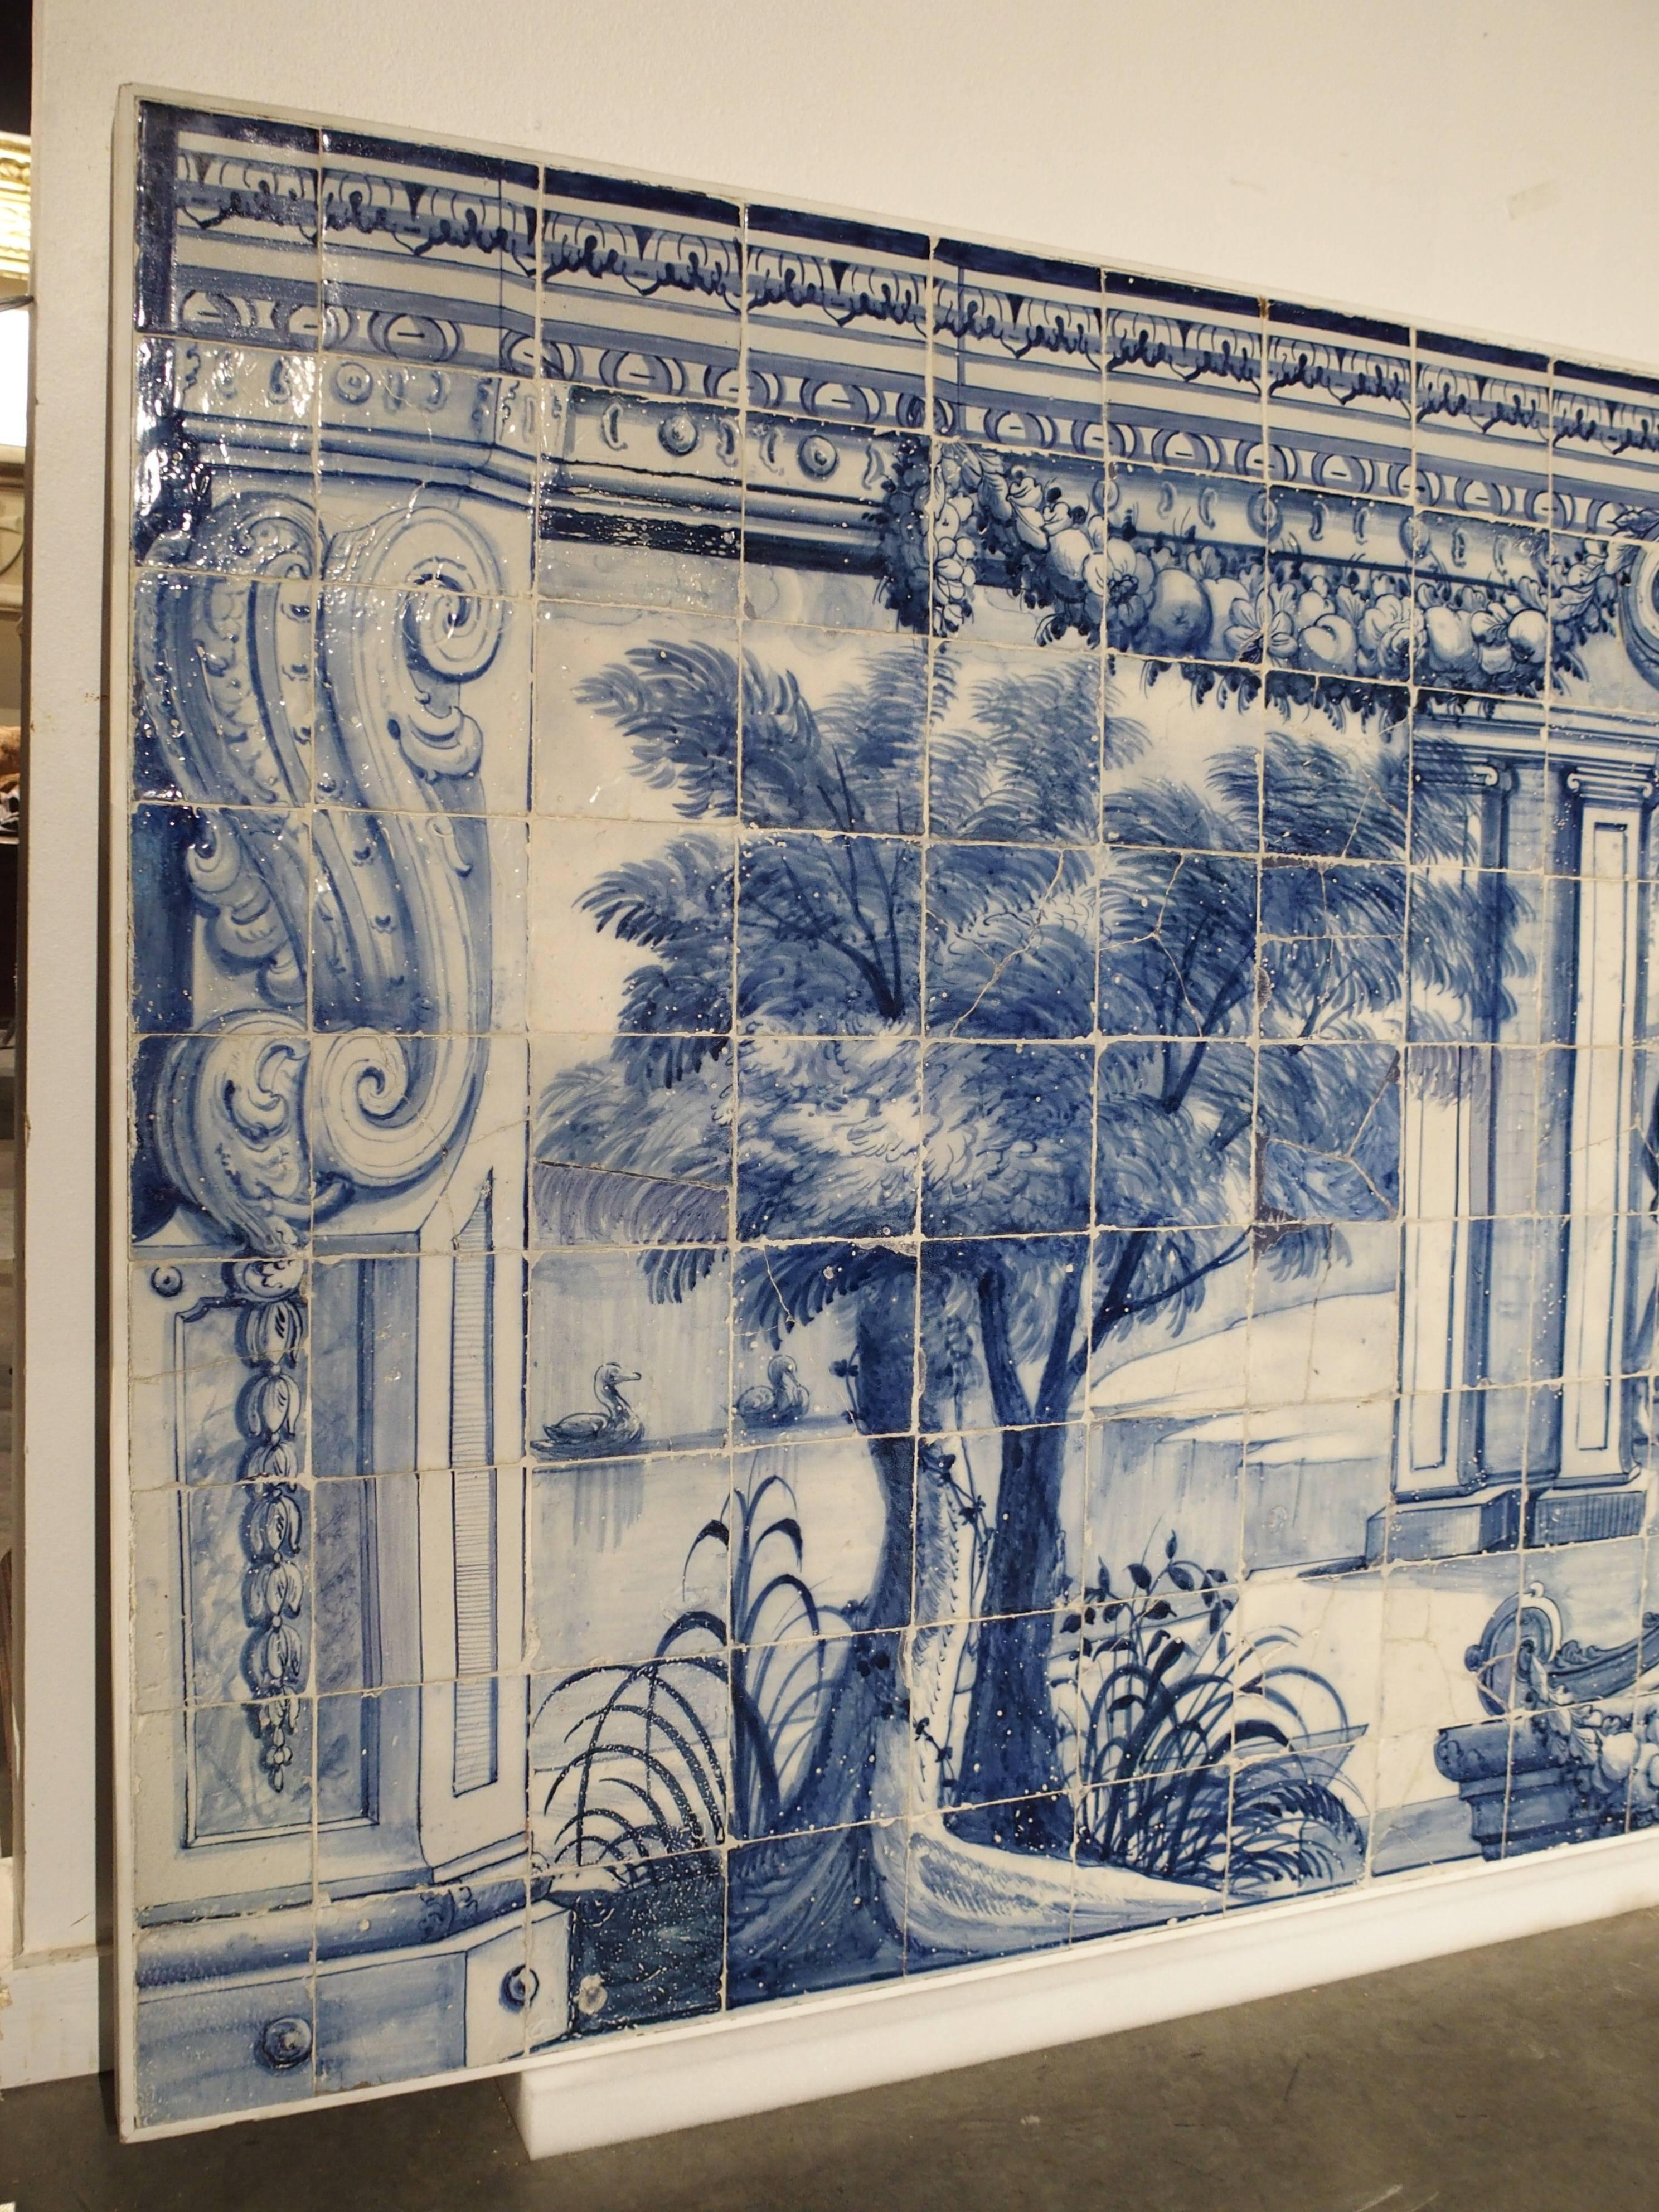 This massive painted tiled panel dates to the early 1700s and is known in Portugal as an Azulejo mural. The word “Azulejo” simply means “tile”, but it is mostly used to describe the beautiful painted tile art that started in 15th century Portugal.